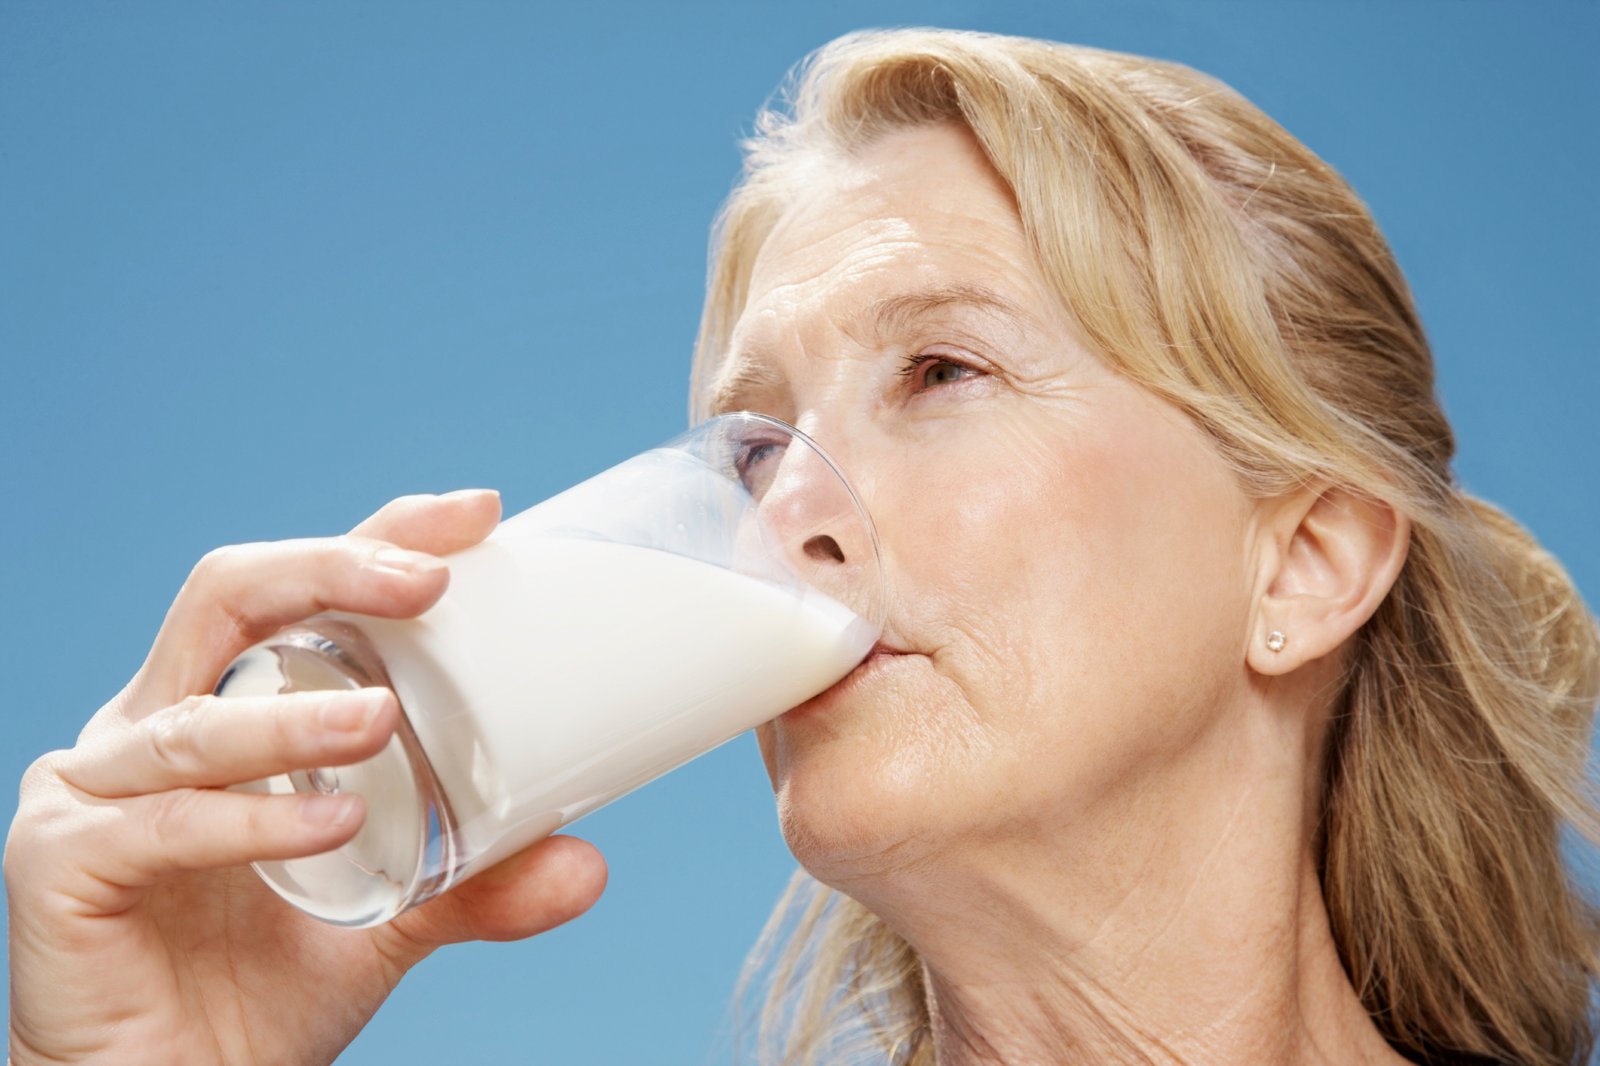 Closeup portrait of a healthy retired woman drinking glass of milk against clear sky